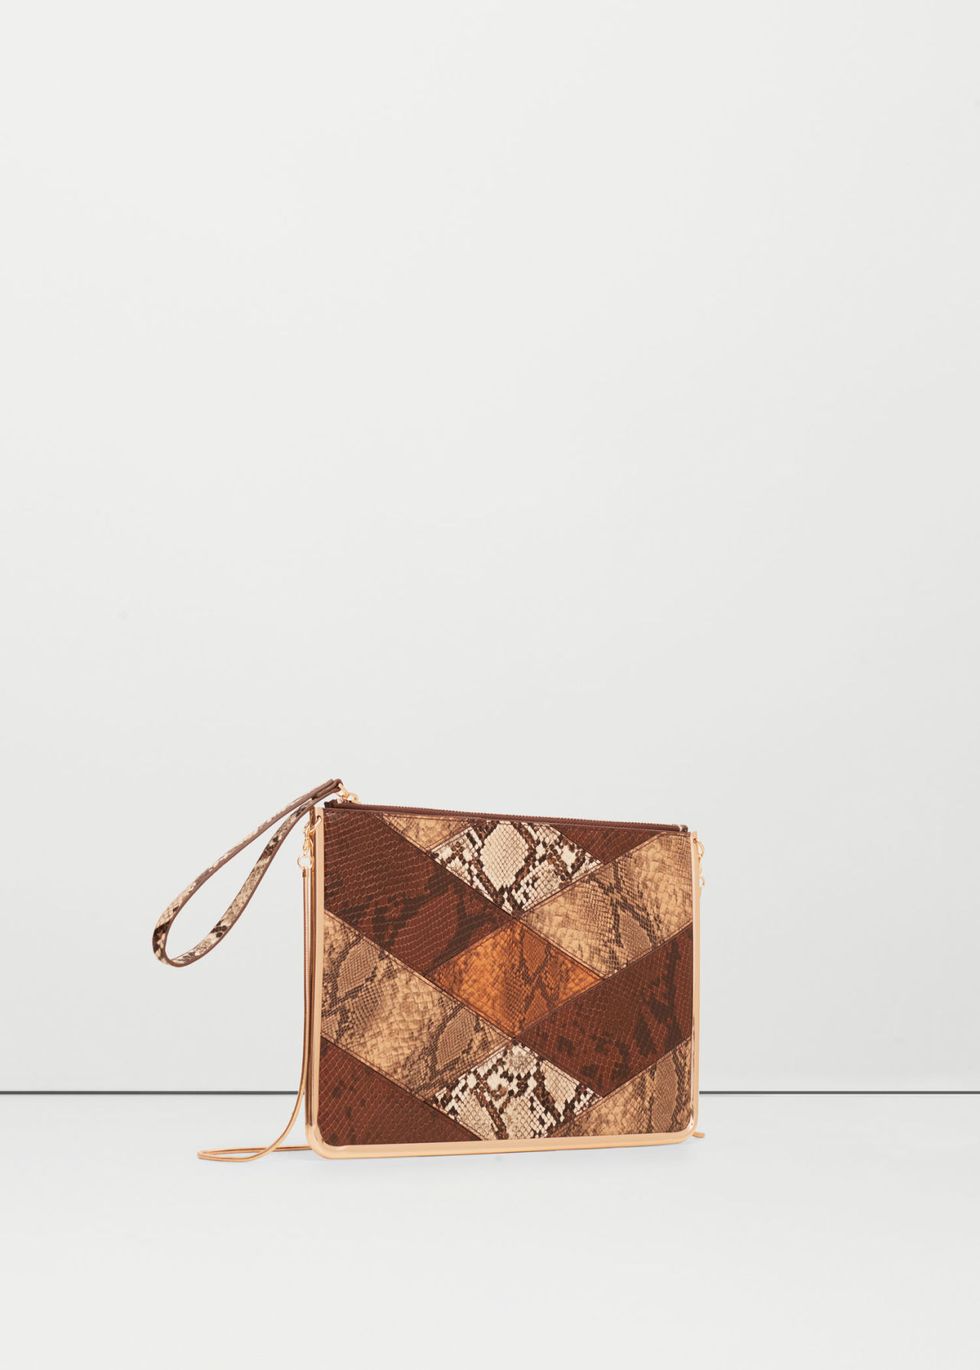 <p>This clutch bag may look unassuming but it's oversized <em data-redactor-tag="em" data-verified="redactor">and</em> packs a pretty punch, too.</p><p><a href="http://shop.mango.com/GB/p0/woman/accessories/bags/crossbody-bags/snake-effect-zip-clutch?id=73005591_32&amp;n=1&amp;s=accesorios.bolsos" target="_blank">Snake-effect zip clutch, £19.99, Mango</a></p><p><em data-redactor-tag="em">Head in store and snap up any of these items by paying with your mobile thanks to&nbsp;<a class="body-el-link standard-body-el-link" href="https://www.visa.co.uk/visa-with-android-pay" target="_blank">Visa and Android Pay</a><sup data-redactor-tag="sup">TM.</sup><span class="redactor-invisible-space" data-verified="redactor" data-redactor-tag="span" data-redactor-class="redactor-invisible-space"></span>Just download the app, add your Visa card and make a purchase!</em><span class="redactor-invisible-space" data-verified="redactor" data-redactor-tag="span" data-redactor-class="redactor-invisible-space"></span><br></p><p><span class="redactor-invisible-space" data-verified="redactor" data-redactor-tag="span" data-redactor-class="redactor-invisible-space"><em data-redactor-tag="em"><em data-redactor-tag="em">Android Pay</em><em data-redactor-tag="em">&nbsp;is a trademark of Google Inc</em><span class="redactor-invisible-space" data-verified="redactor" data-redactor-tag="span" data-redactor-class="redactor-invisible-space"></span></em><span class="redactor-invisible-space" data-verified="redactor" data-redactor-tag="span" data-redactor-class="redactor-invisible-space"></span><br></span></p>